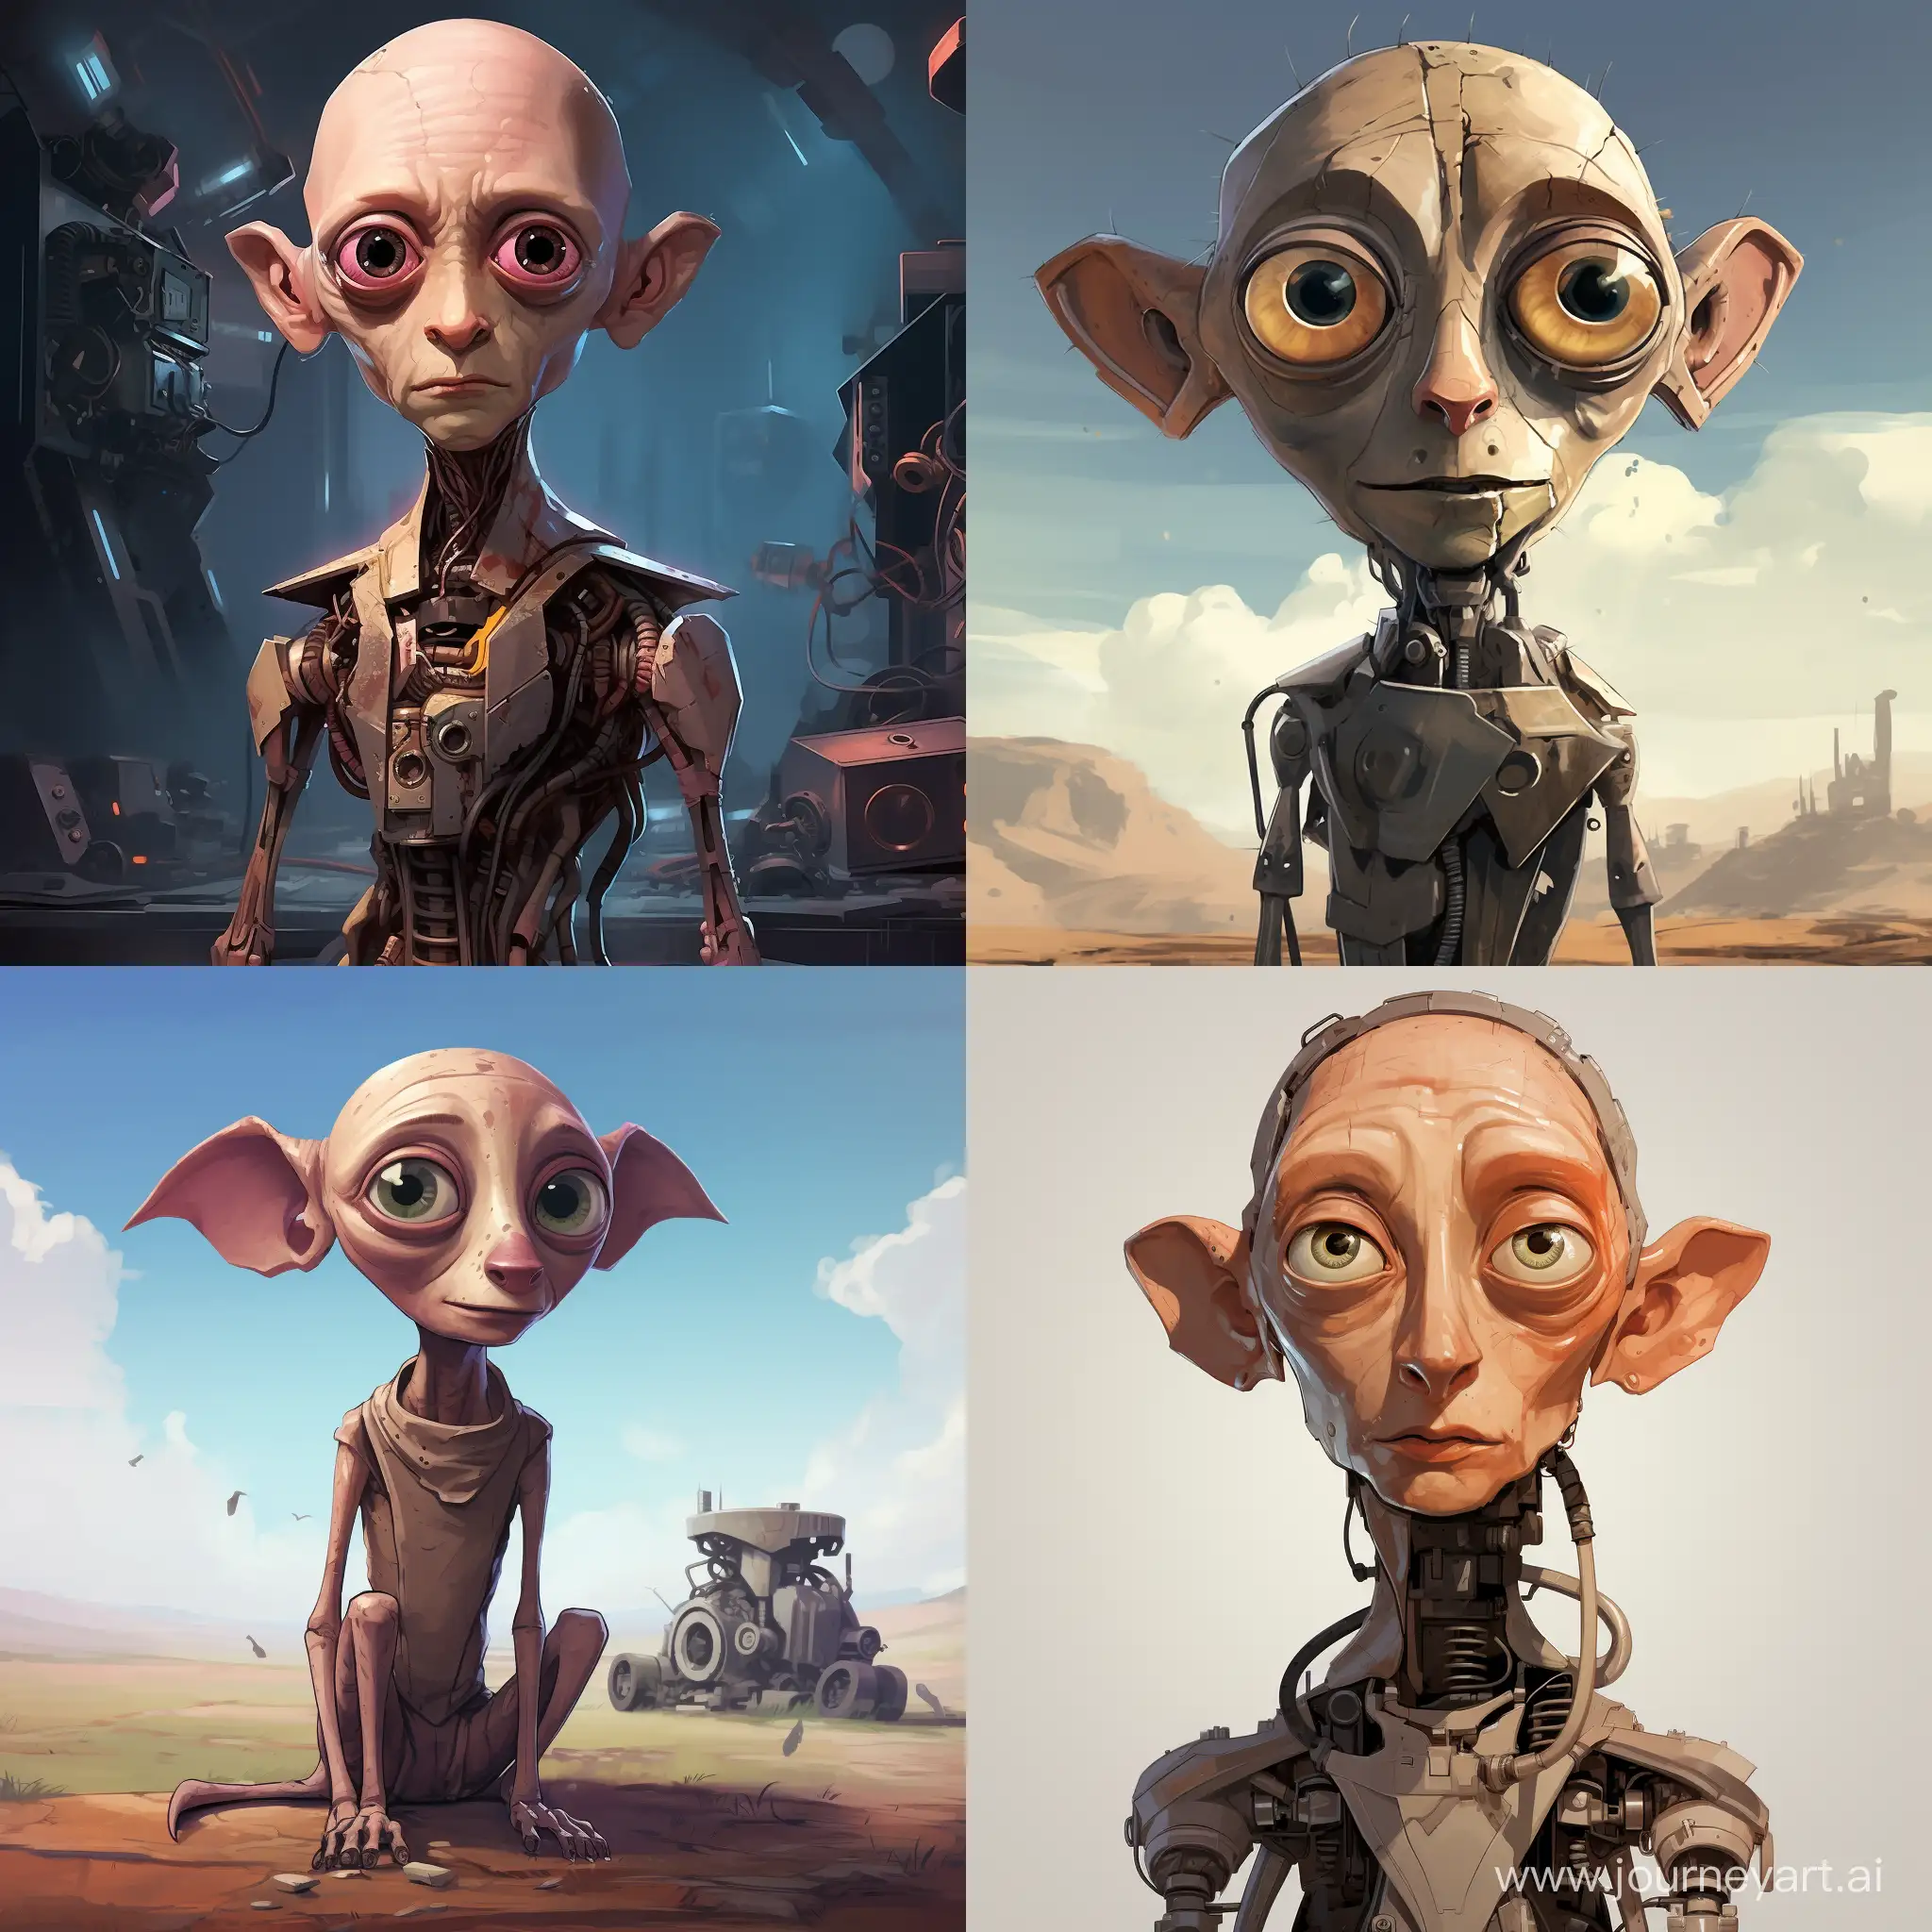 Dobby from Harry Potter as cartoon with a robotic style